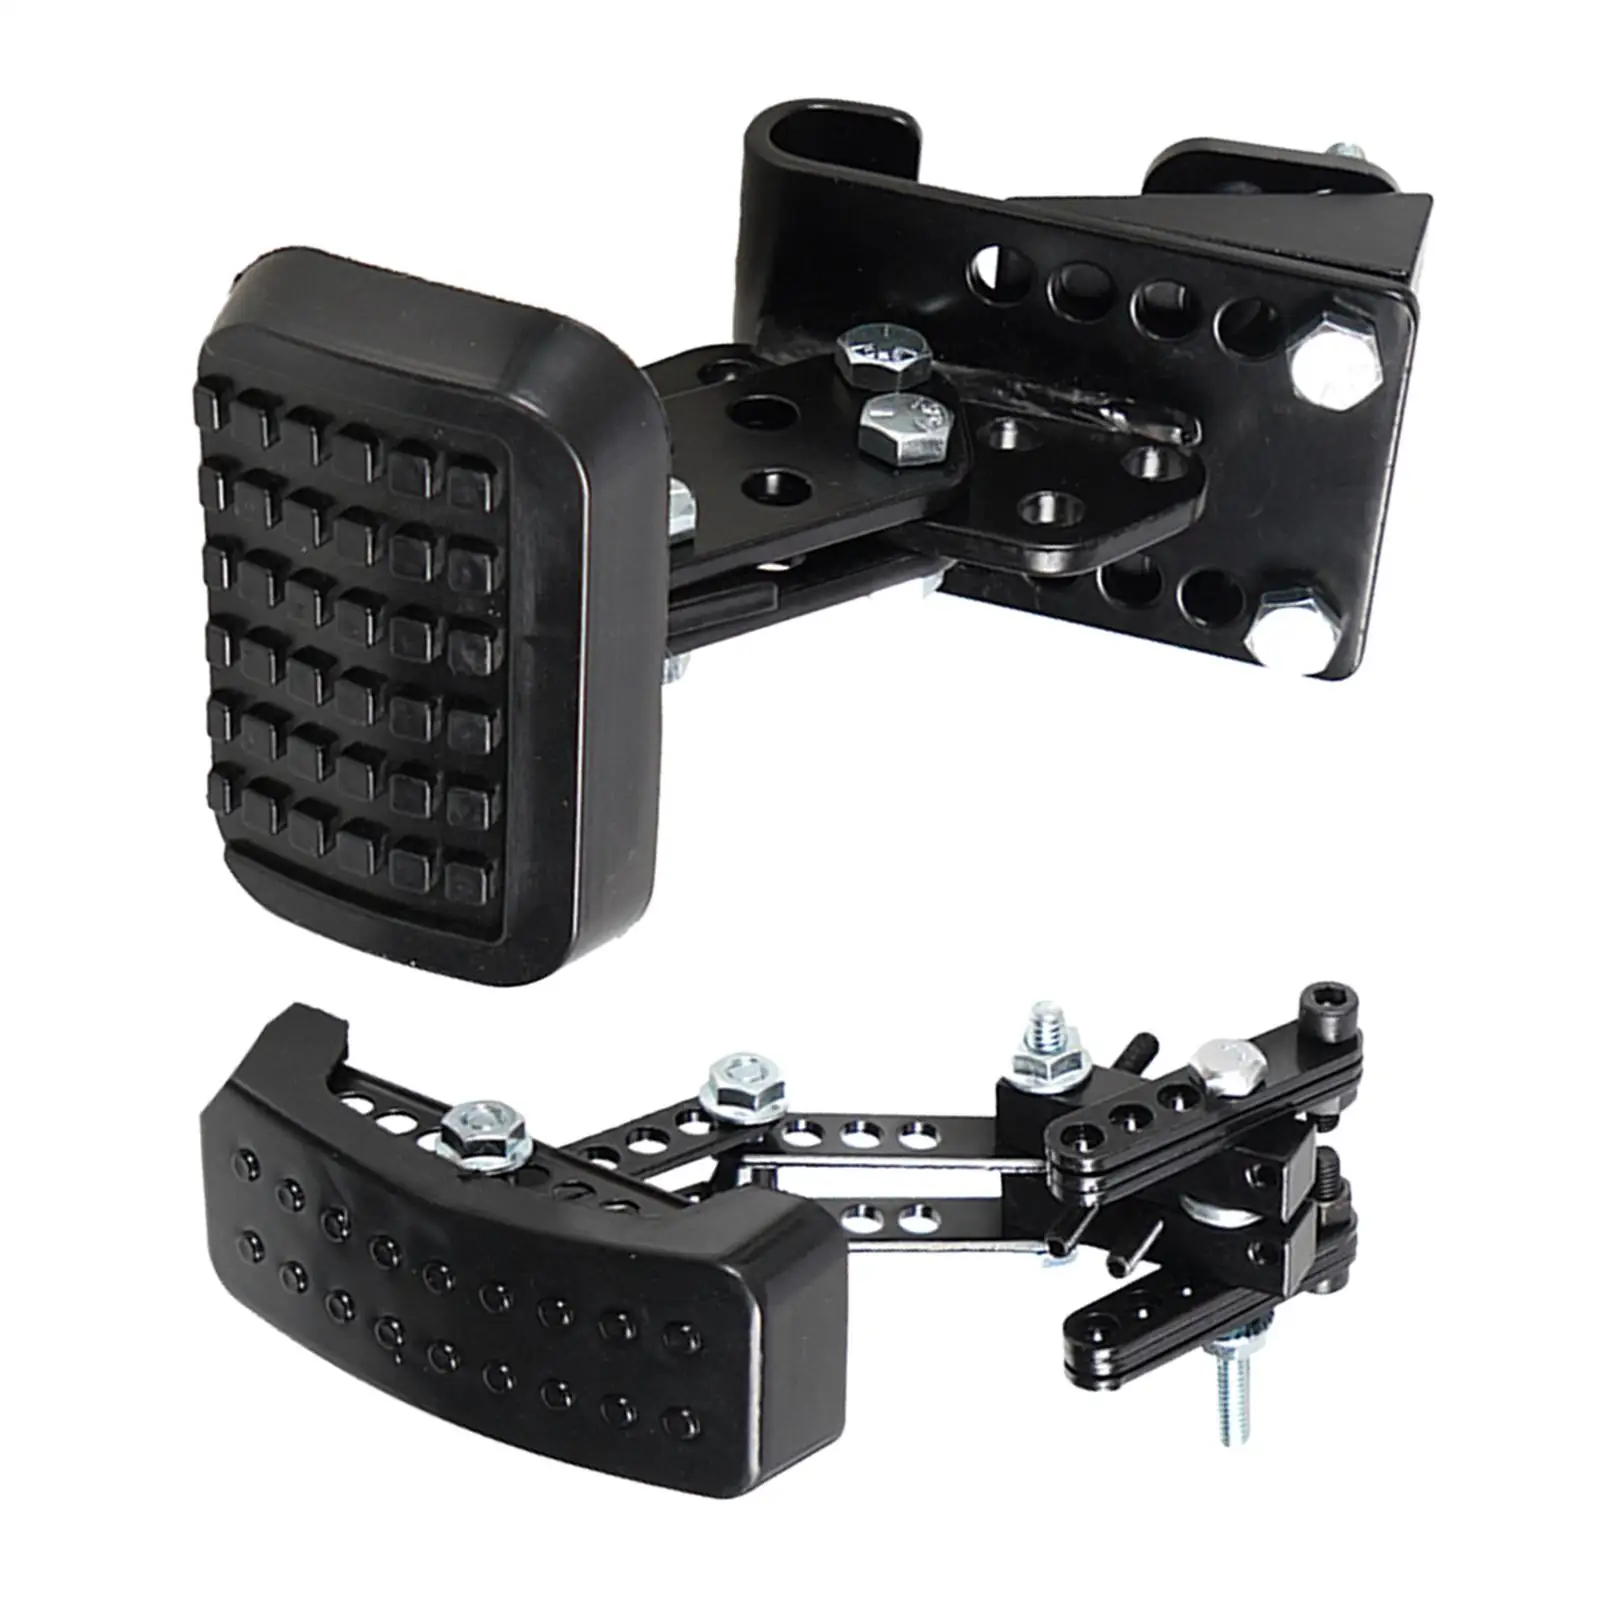 Brake and Pedals Extender Pedal Assembly for Short Drivers Replacement